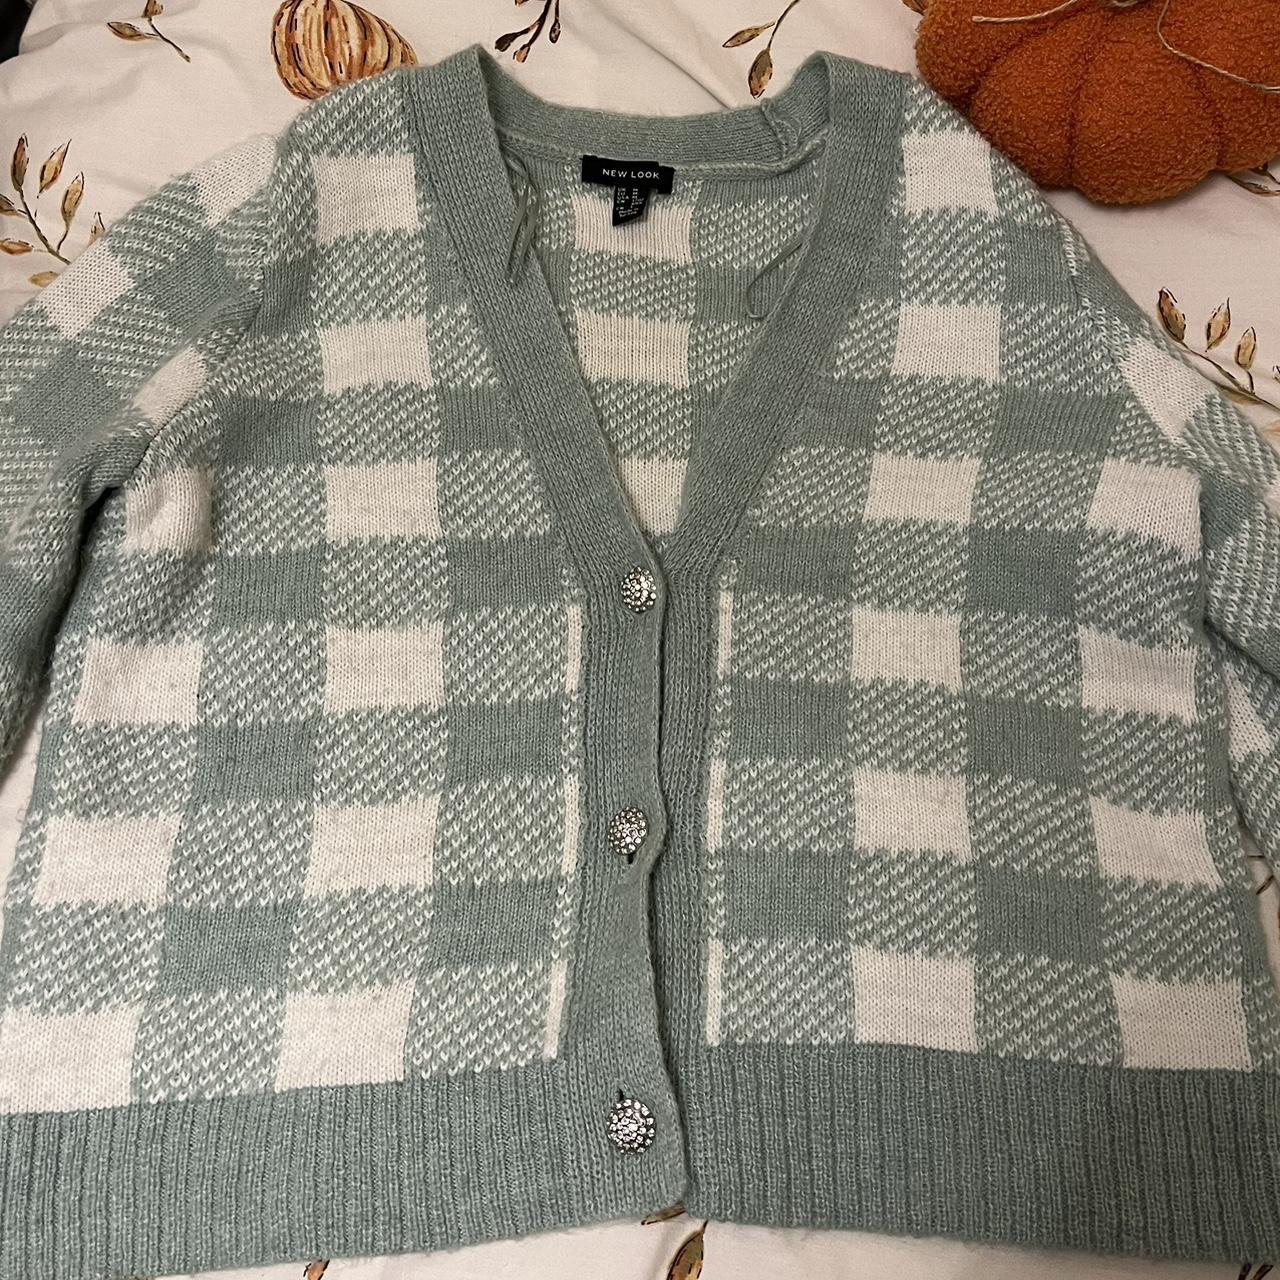 New Look Women's White and Green Cardigan | Depop